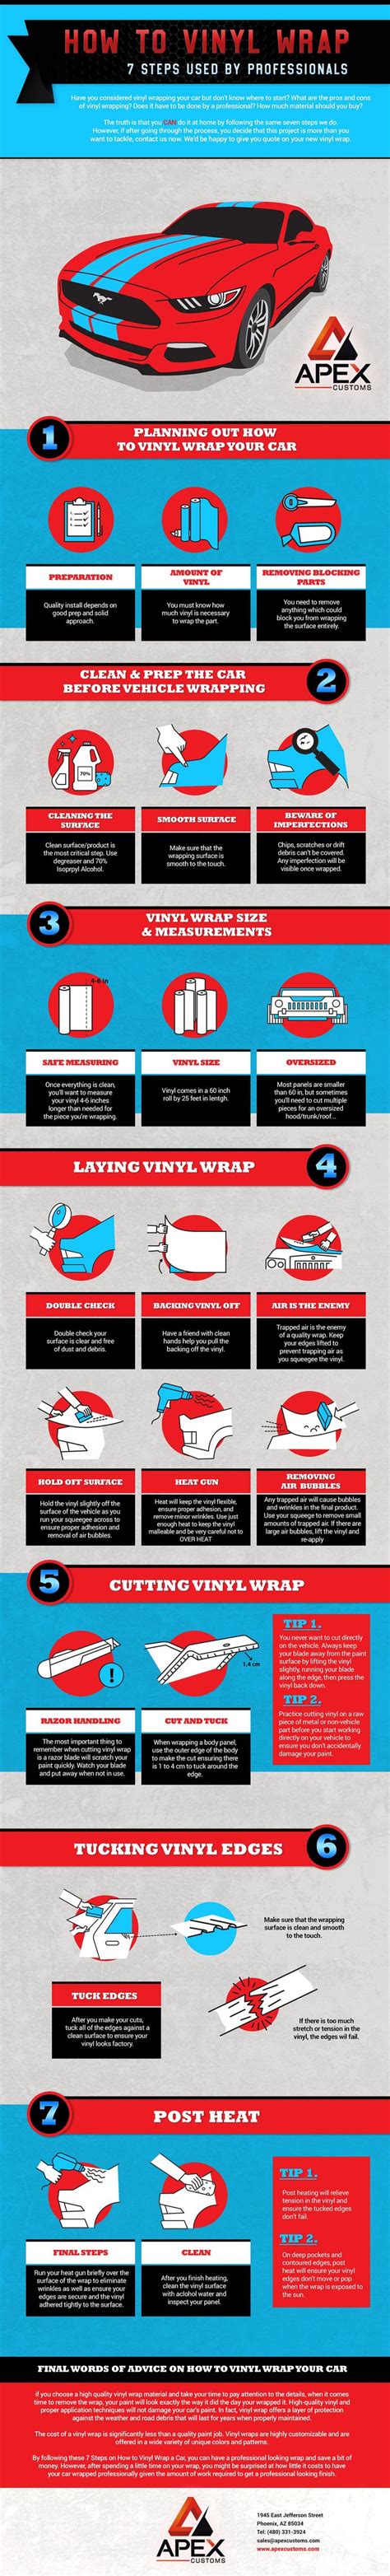 Diy Vinyl Wrap Your Car The 7 Step Professional Method Infographic